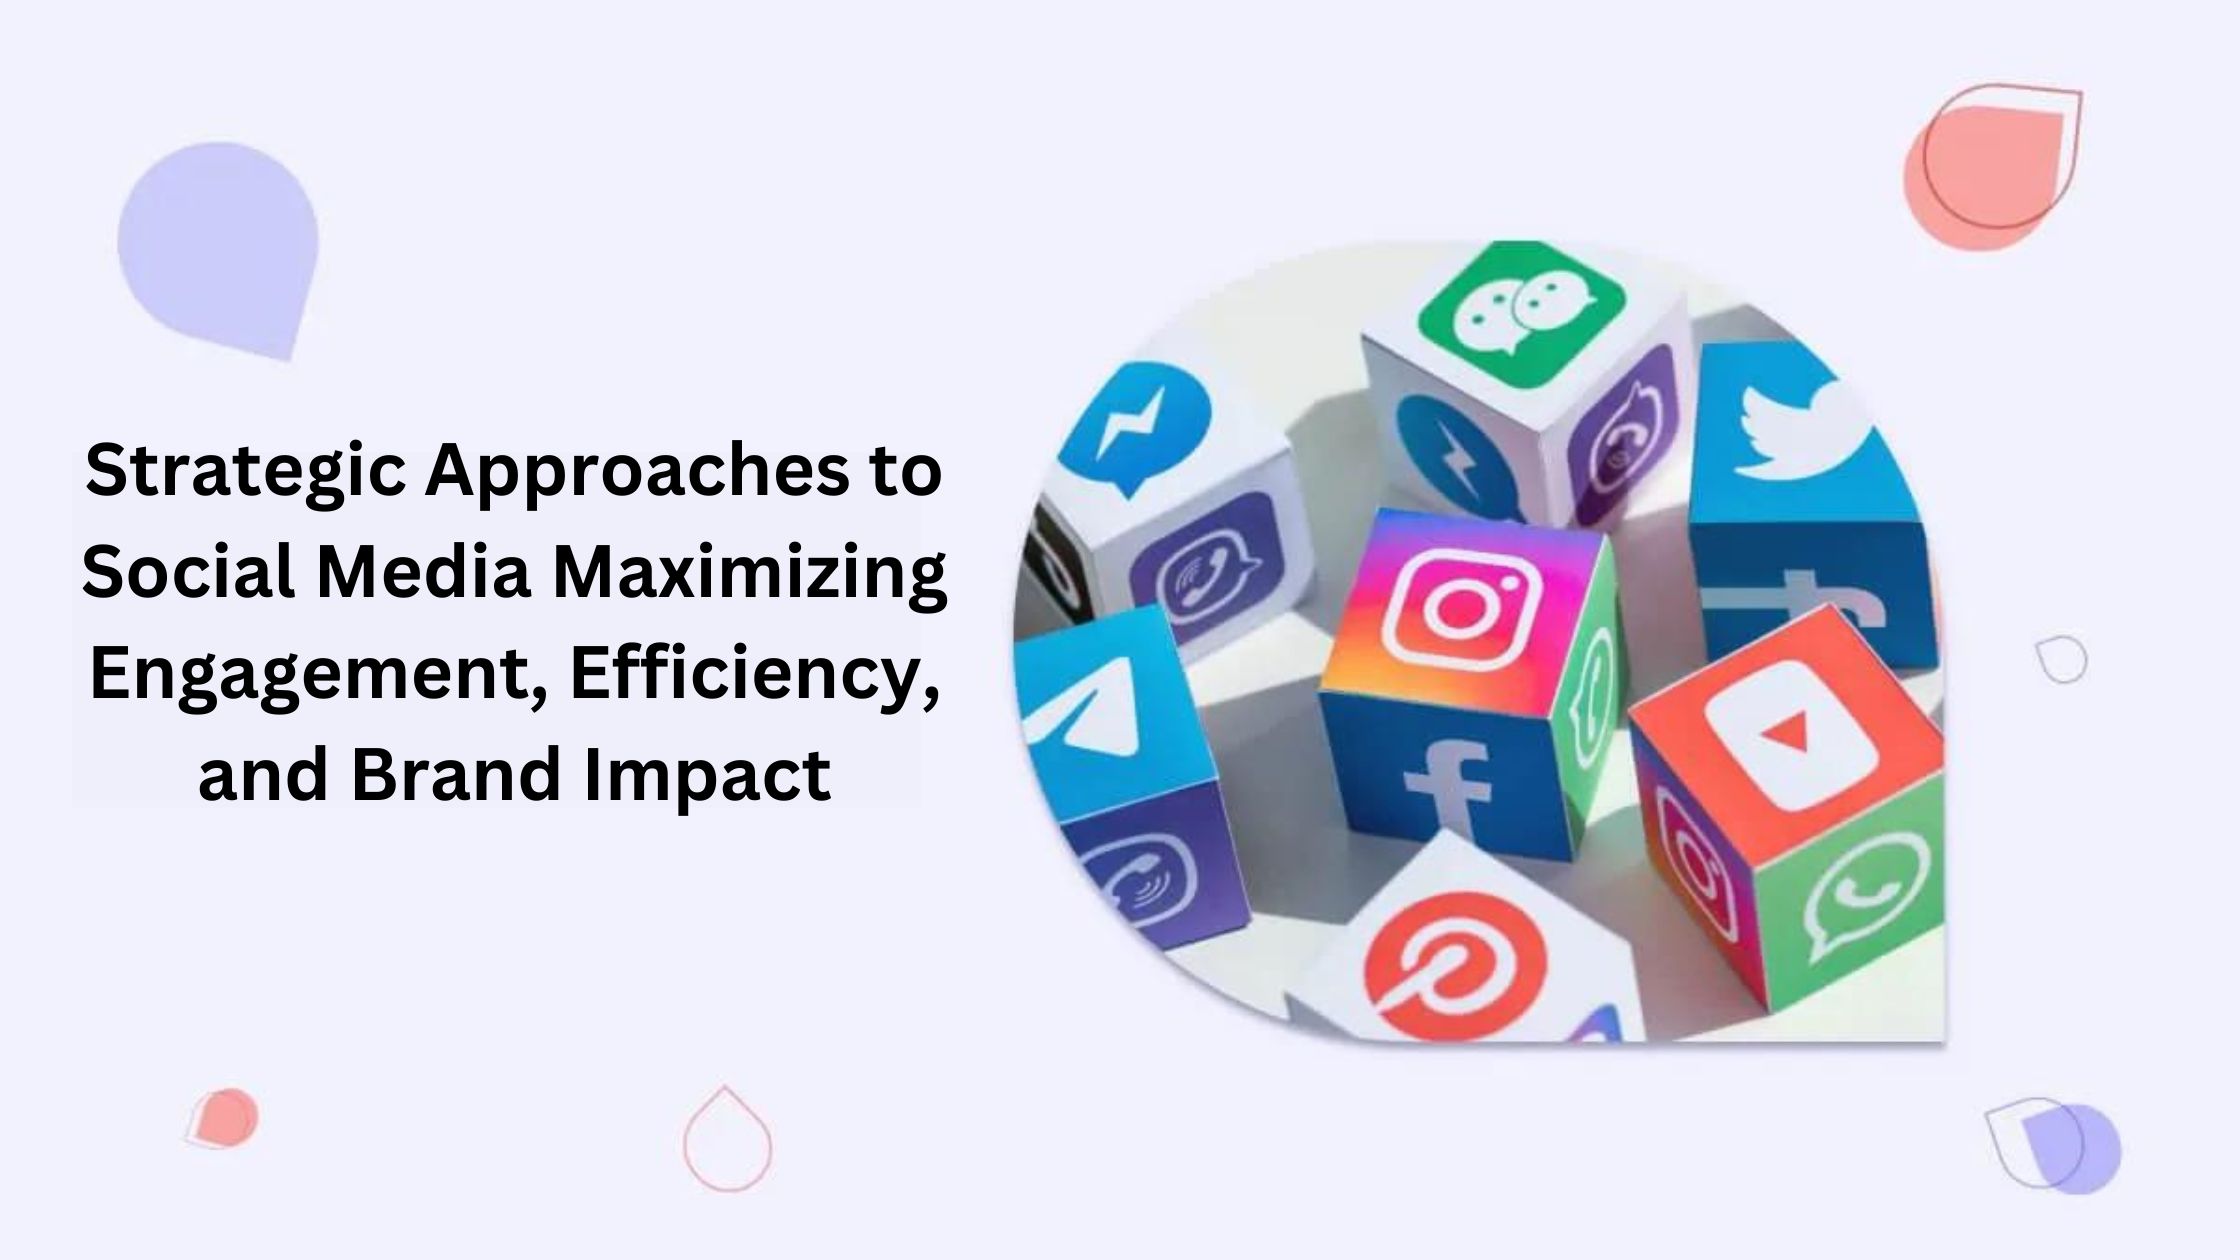 Strategic Approaches to Social Media: Maximizing Engagement, Efficiency, and Brand Impact